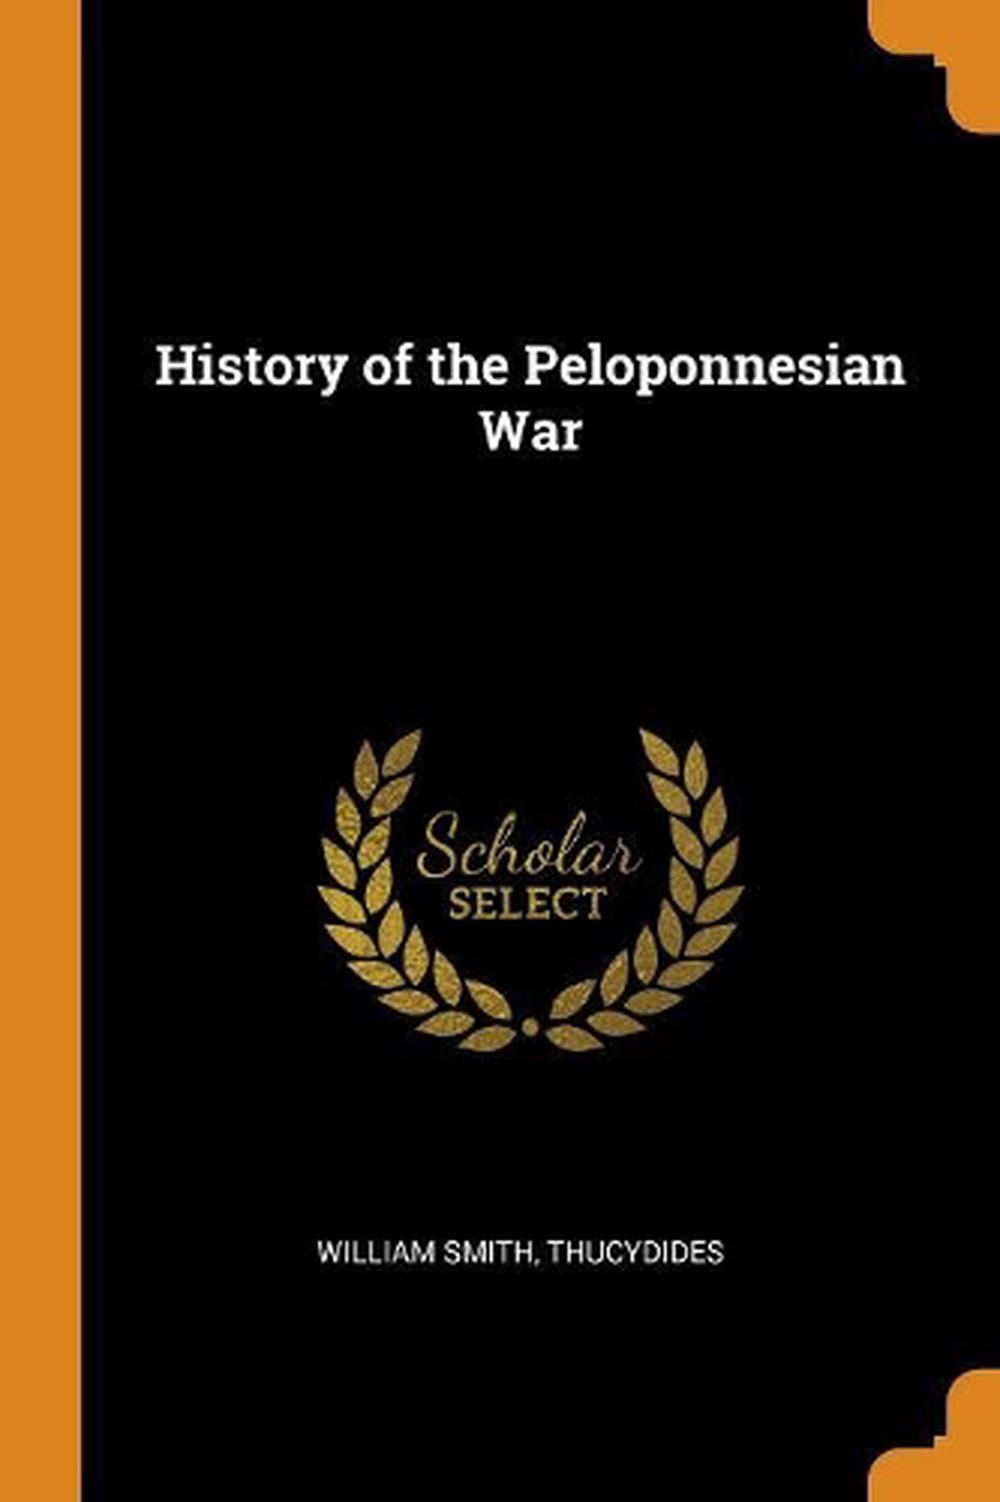 thucydides peloponnesian war sparknotes